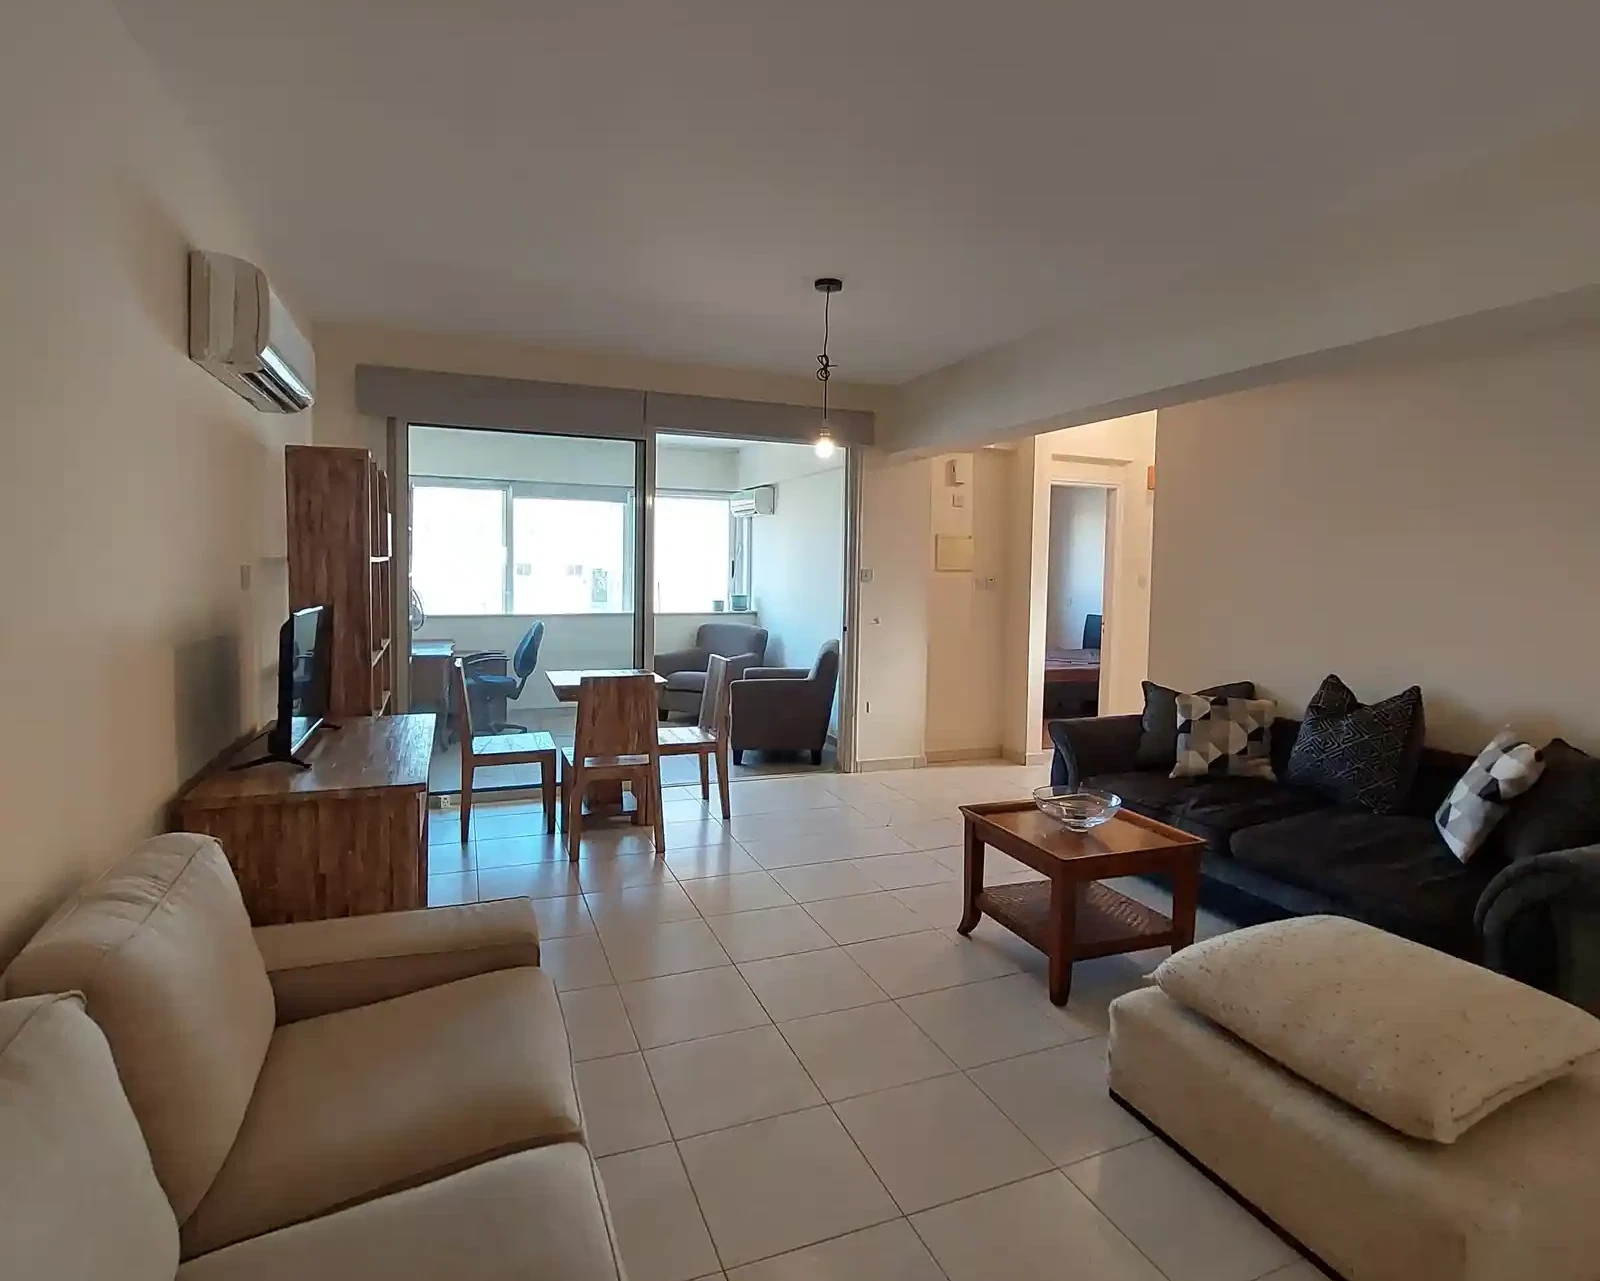 4-bedroom penthouse to rent €1.600, image 1